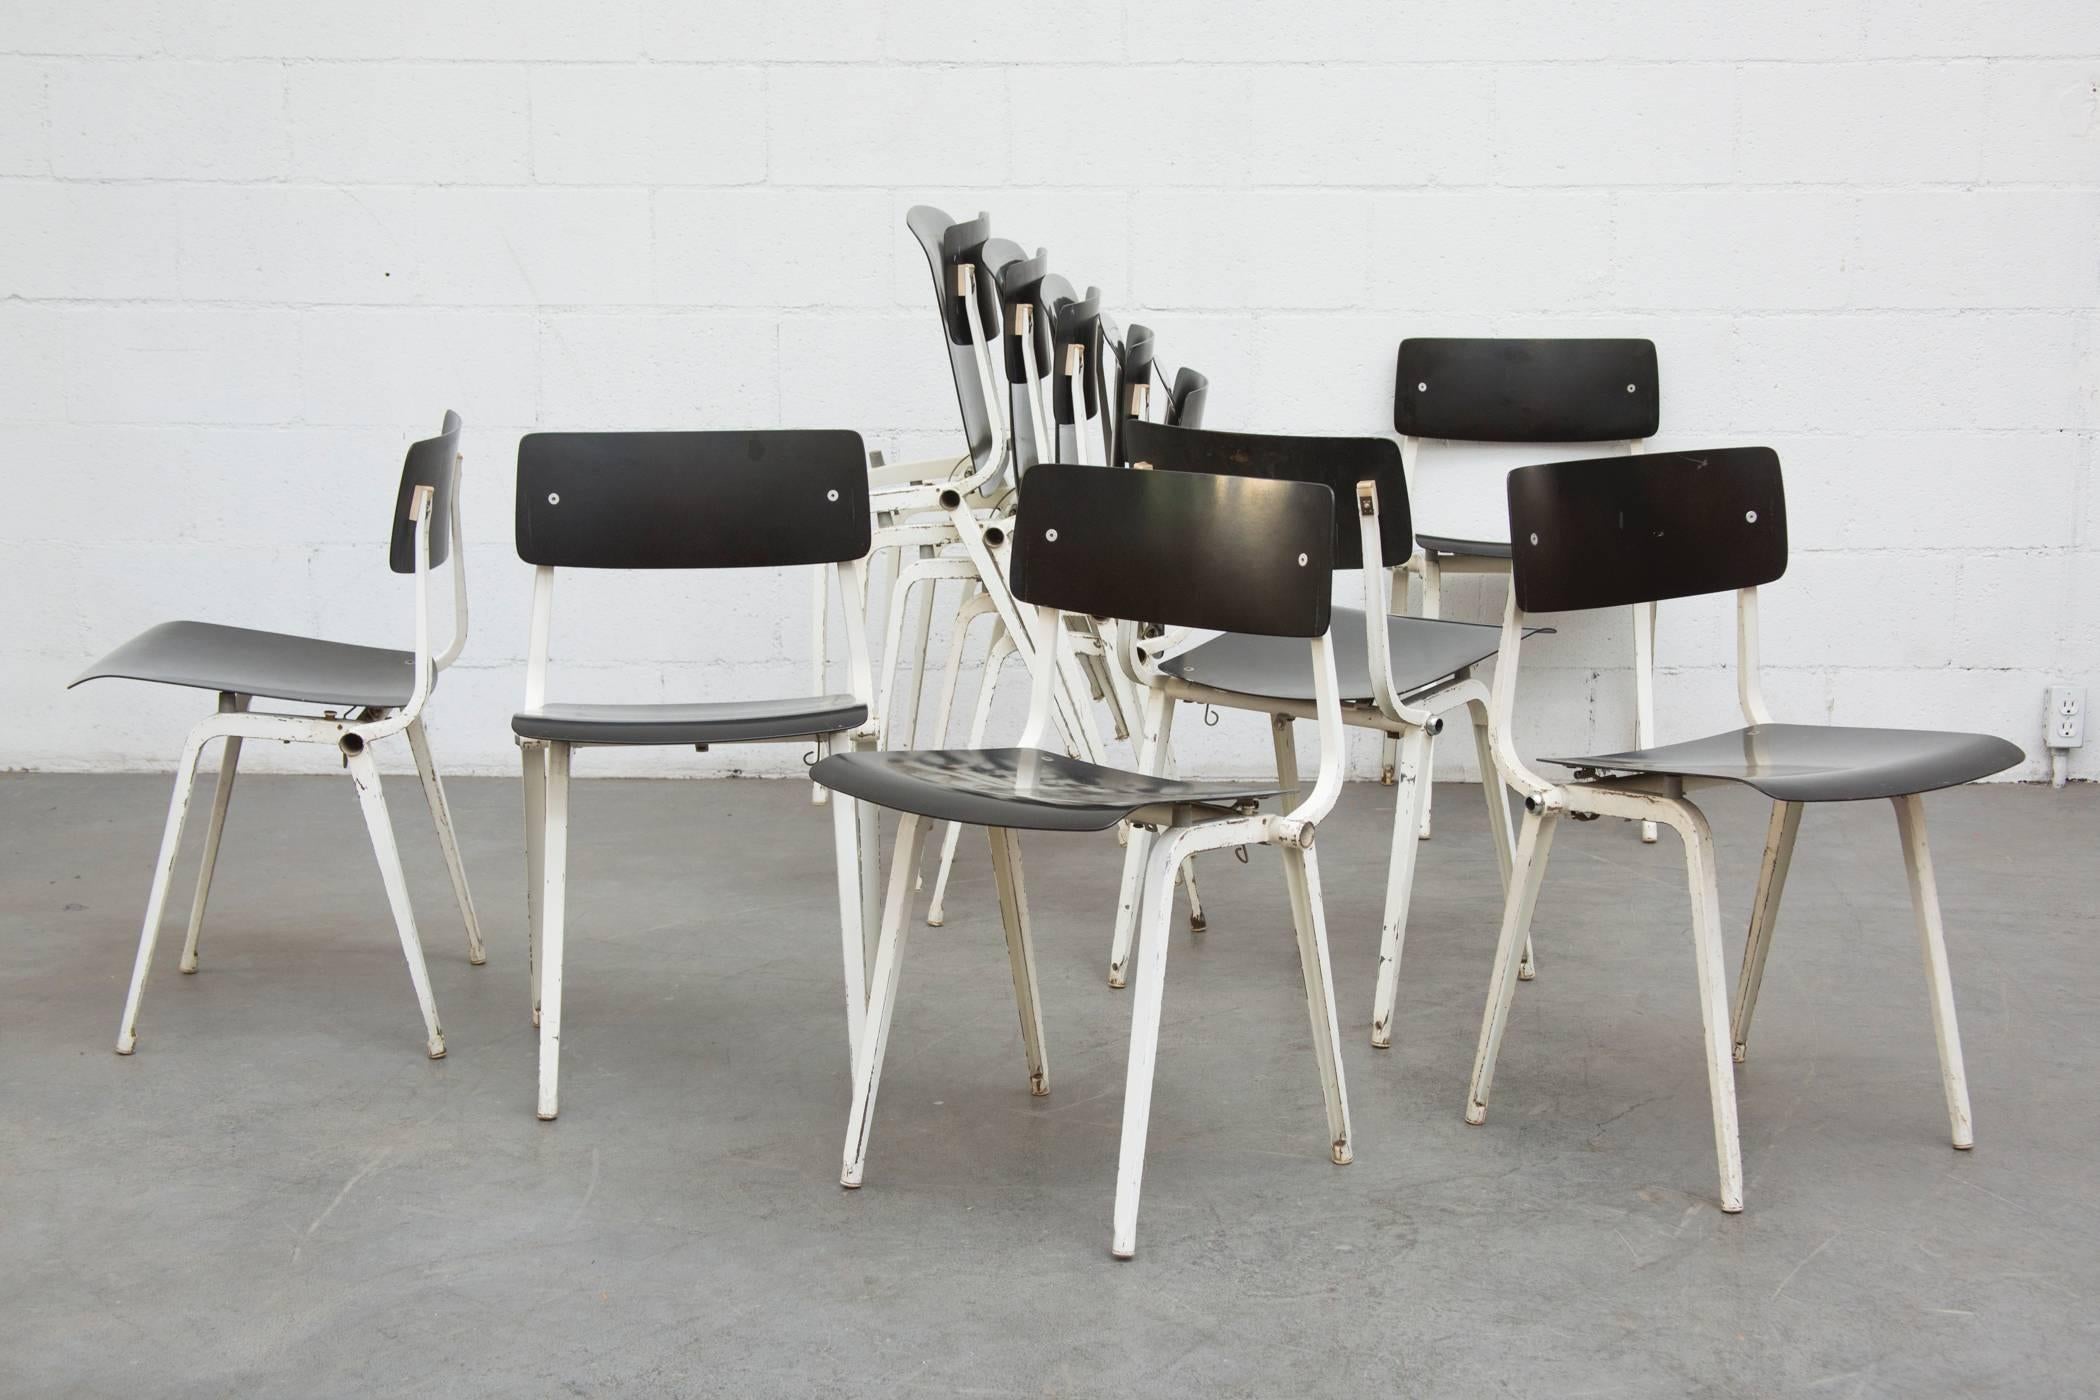 Designed in 1959 and only produced for four years, the Friso Kramer theater chairs are very rare. They fold and can be stacked. White enameled sheet metal frame and molded acrylic seat and back. In very original condition with some surface rust and